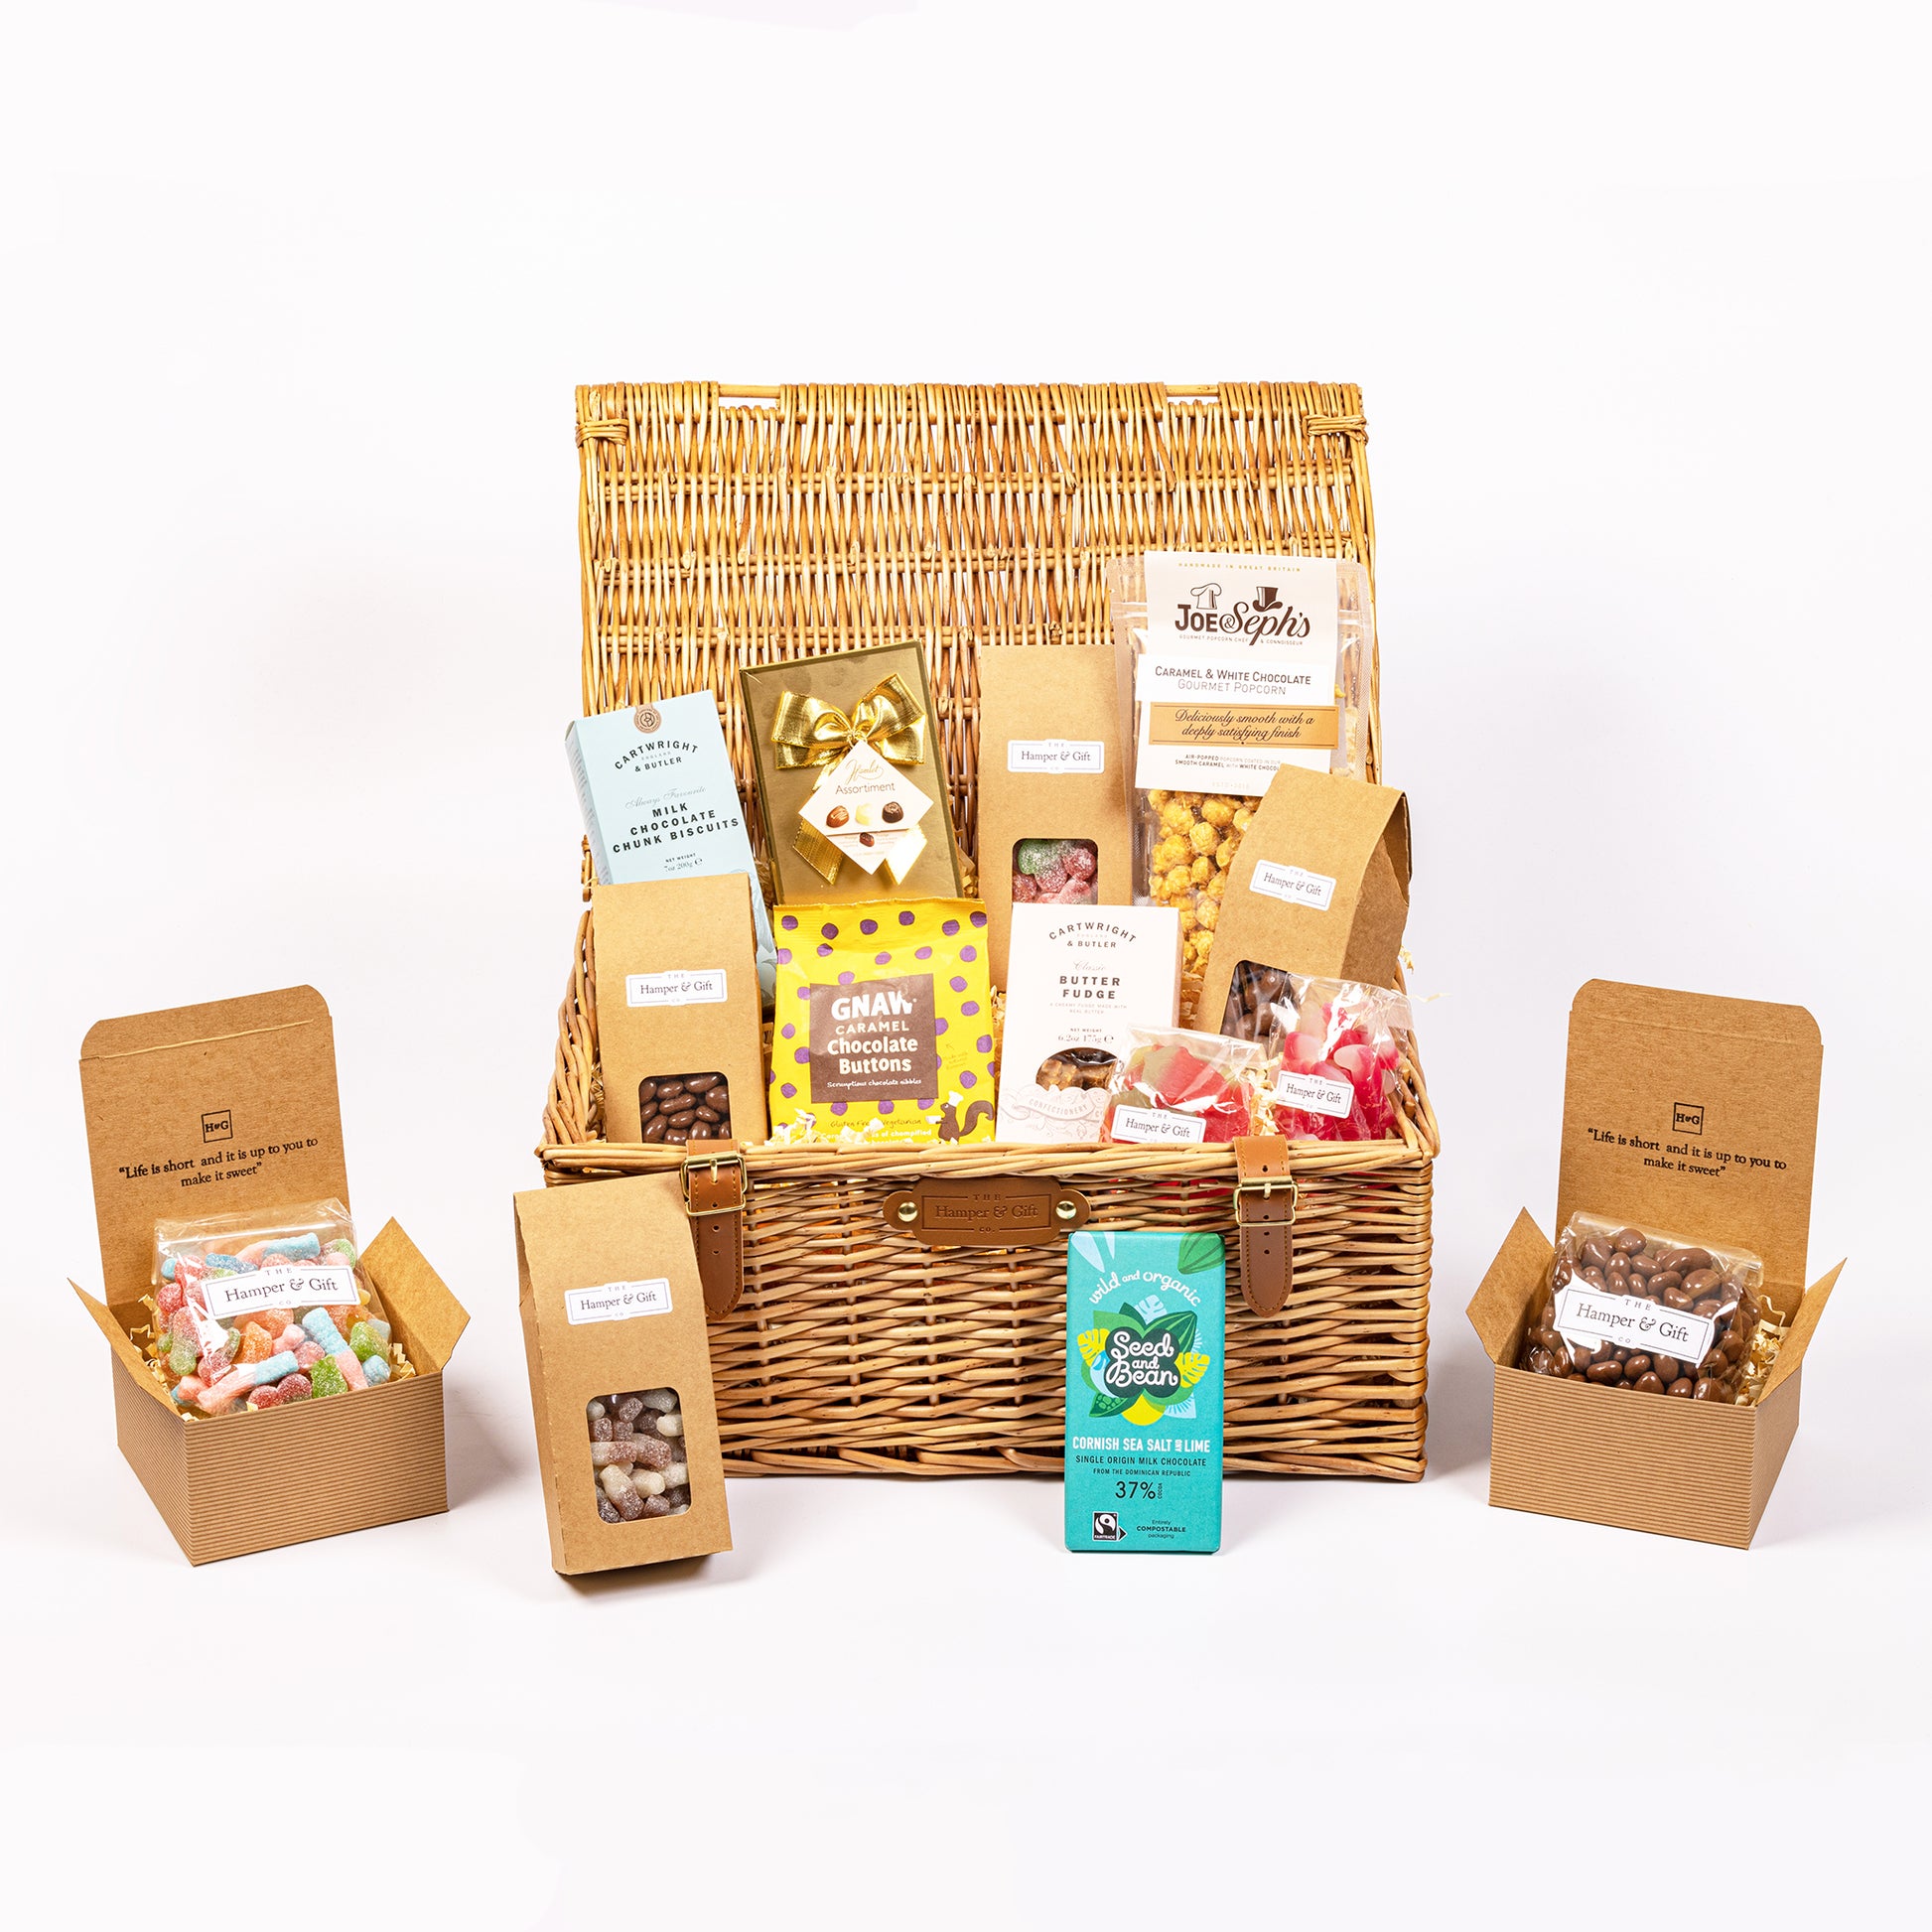 Large Chocolate & Sweet Hamper filled with 14 different chocolate, sweet, biscuit, fudge and popcorn treats